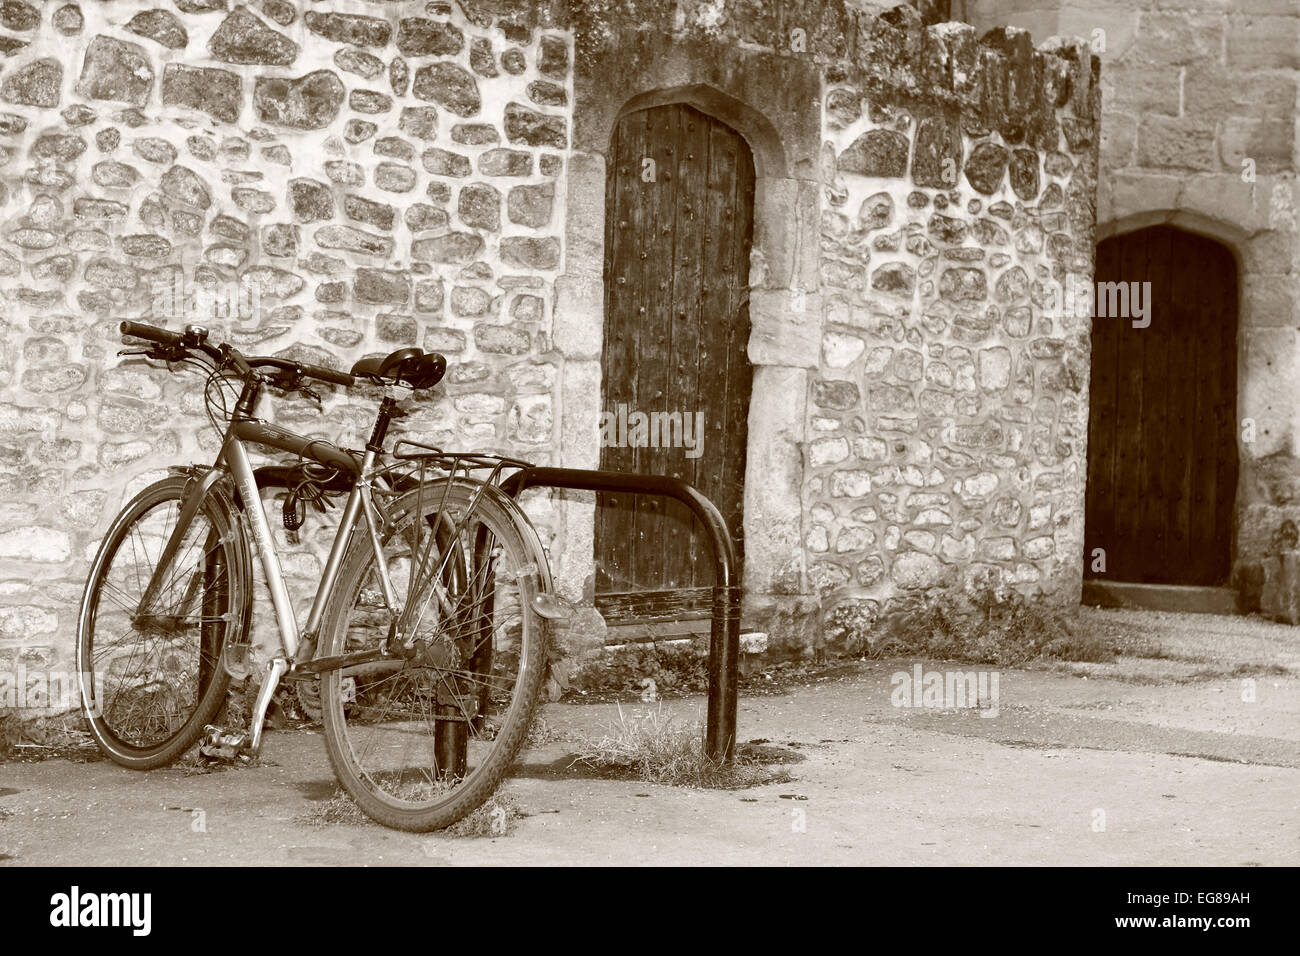 A bicycle locked to a cycle rack next to an old stone wall and wooden door in Wells, Somerset, England Stock Photo